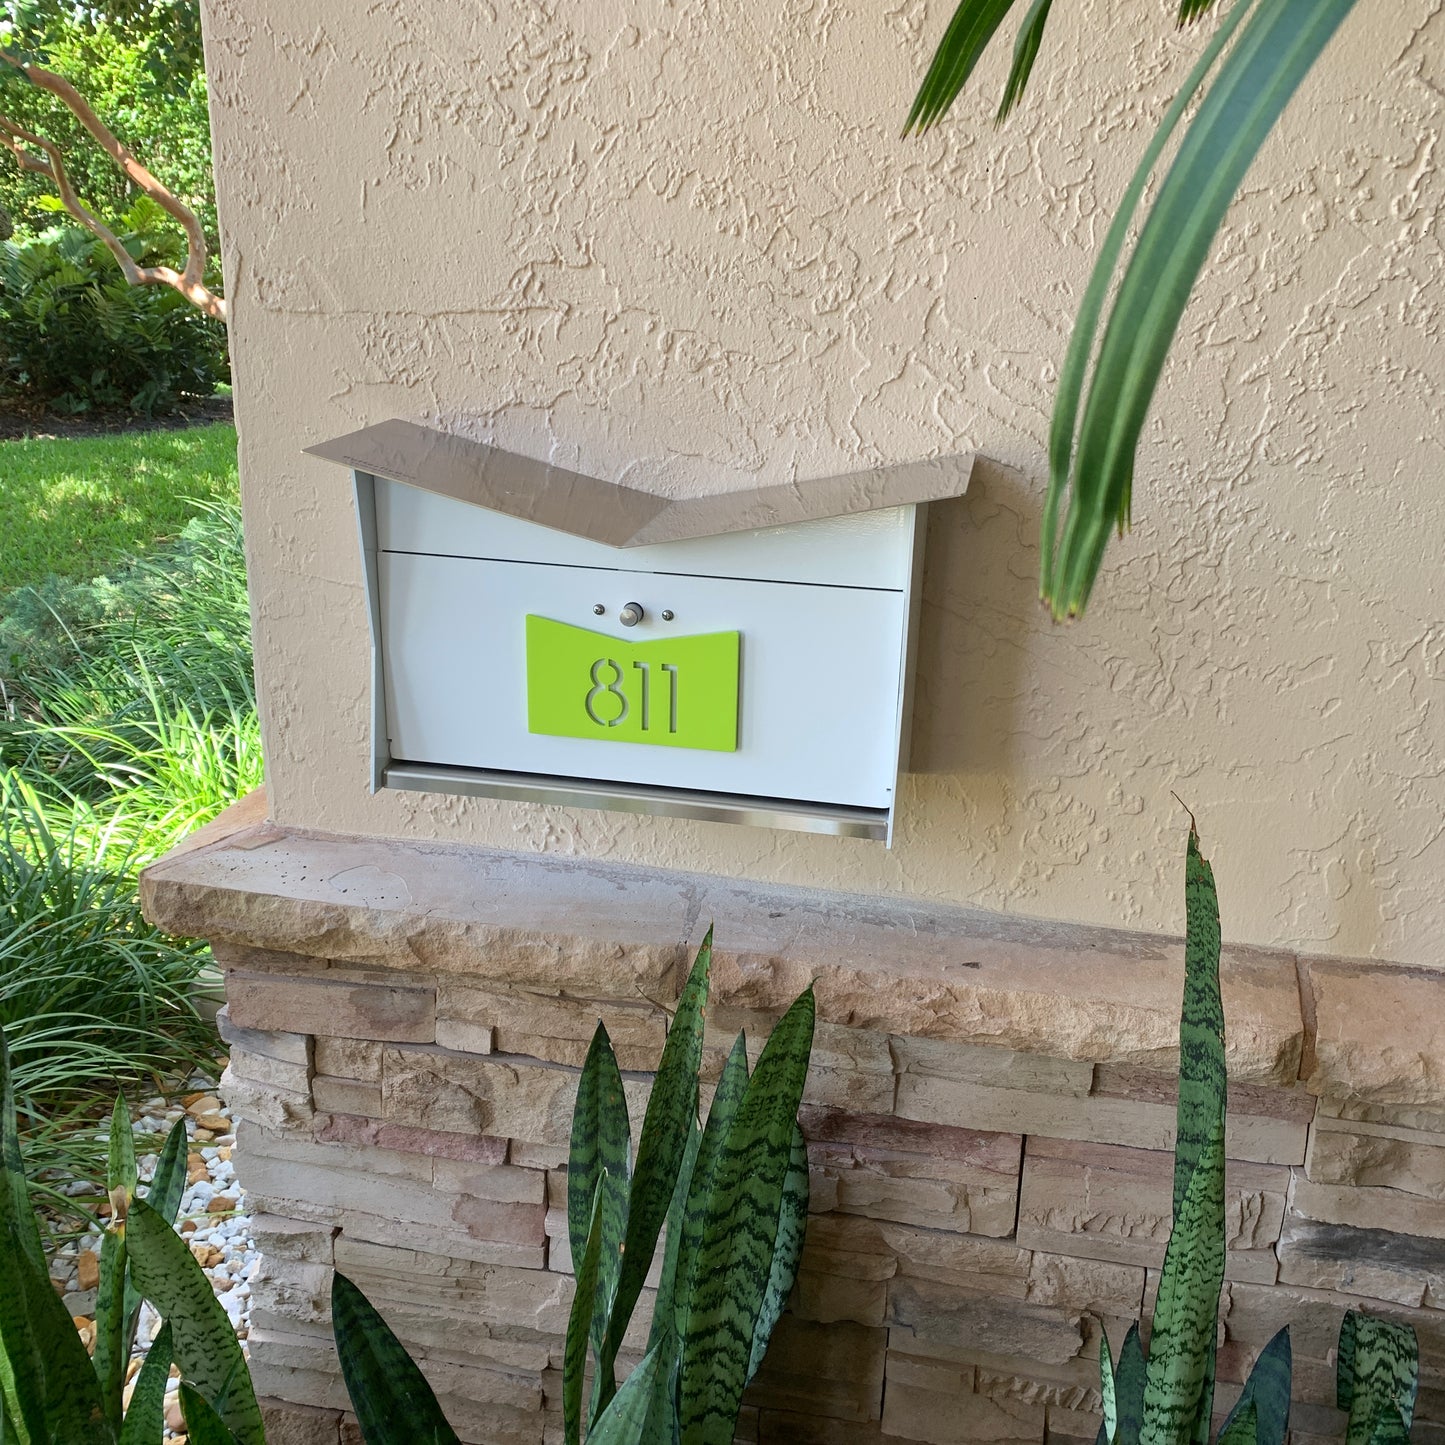 Wall Mount Mailbox mounted to outdoor wall. ButterFly Box in arctic white and lemon lime